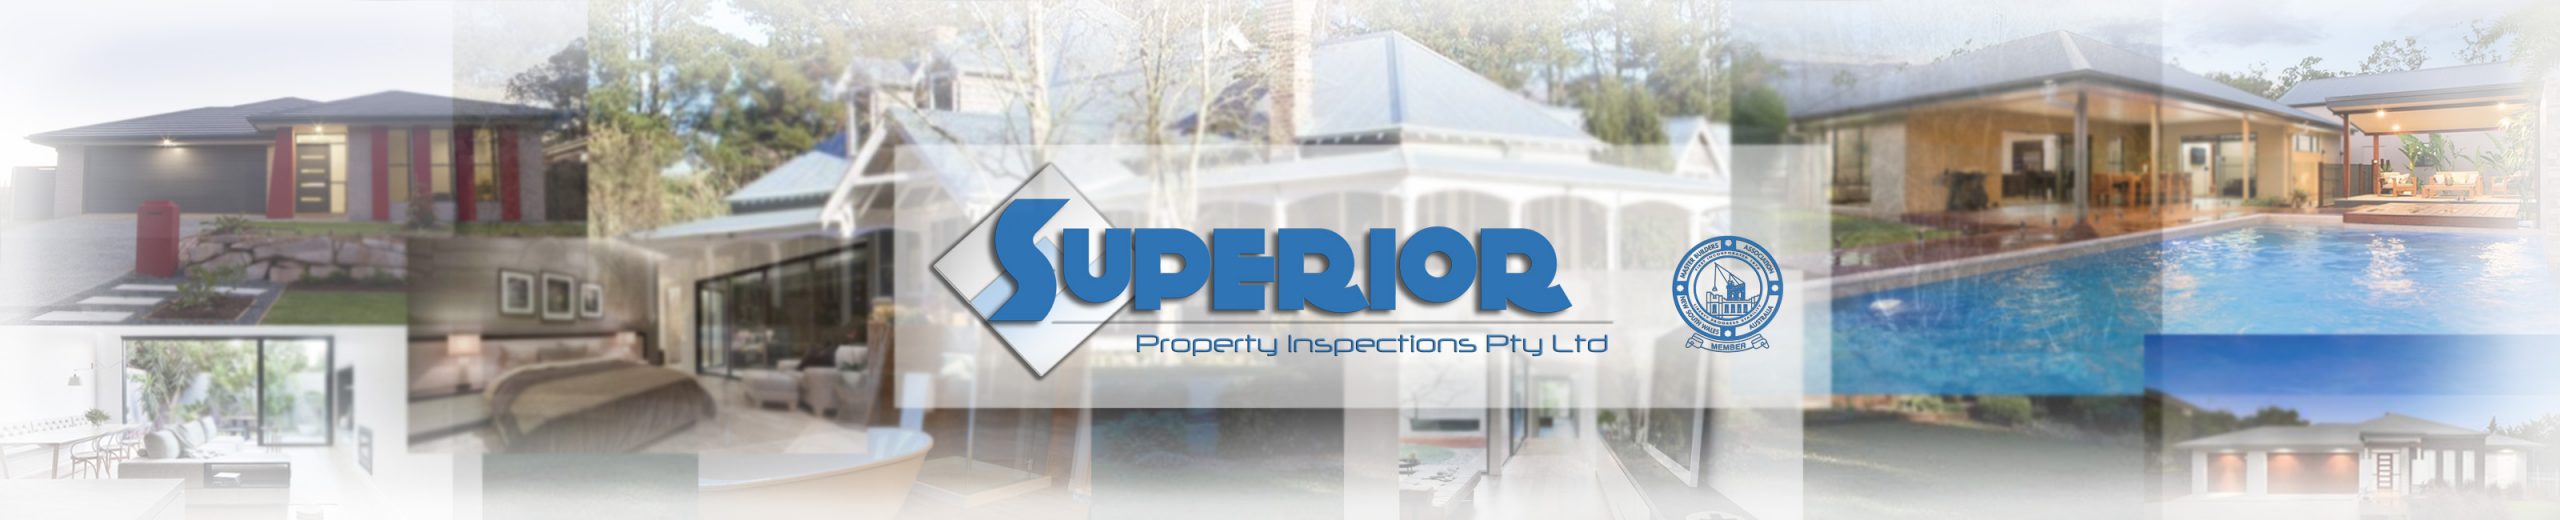 Superior Property Inspections